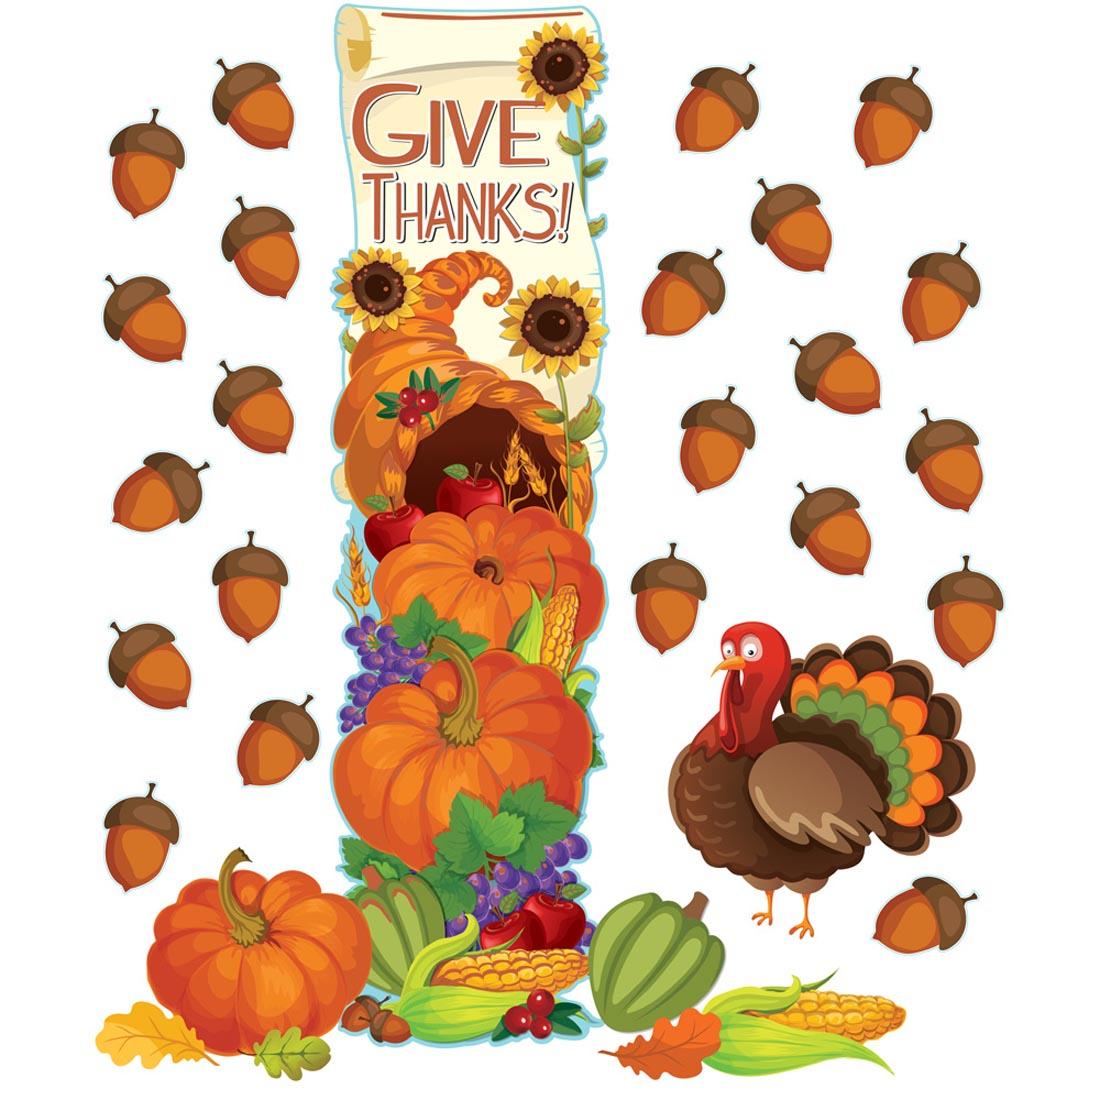 Thanksgiving All-In-One Door Decor Kit by Eureka